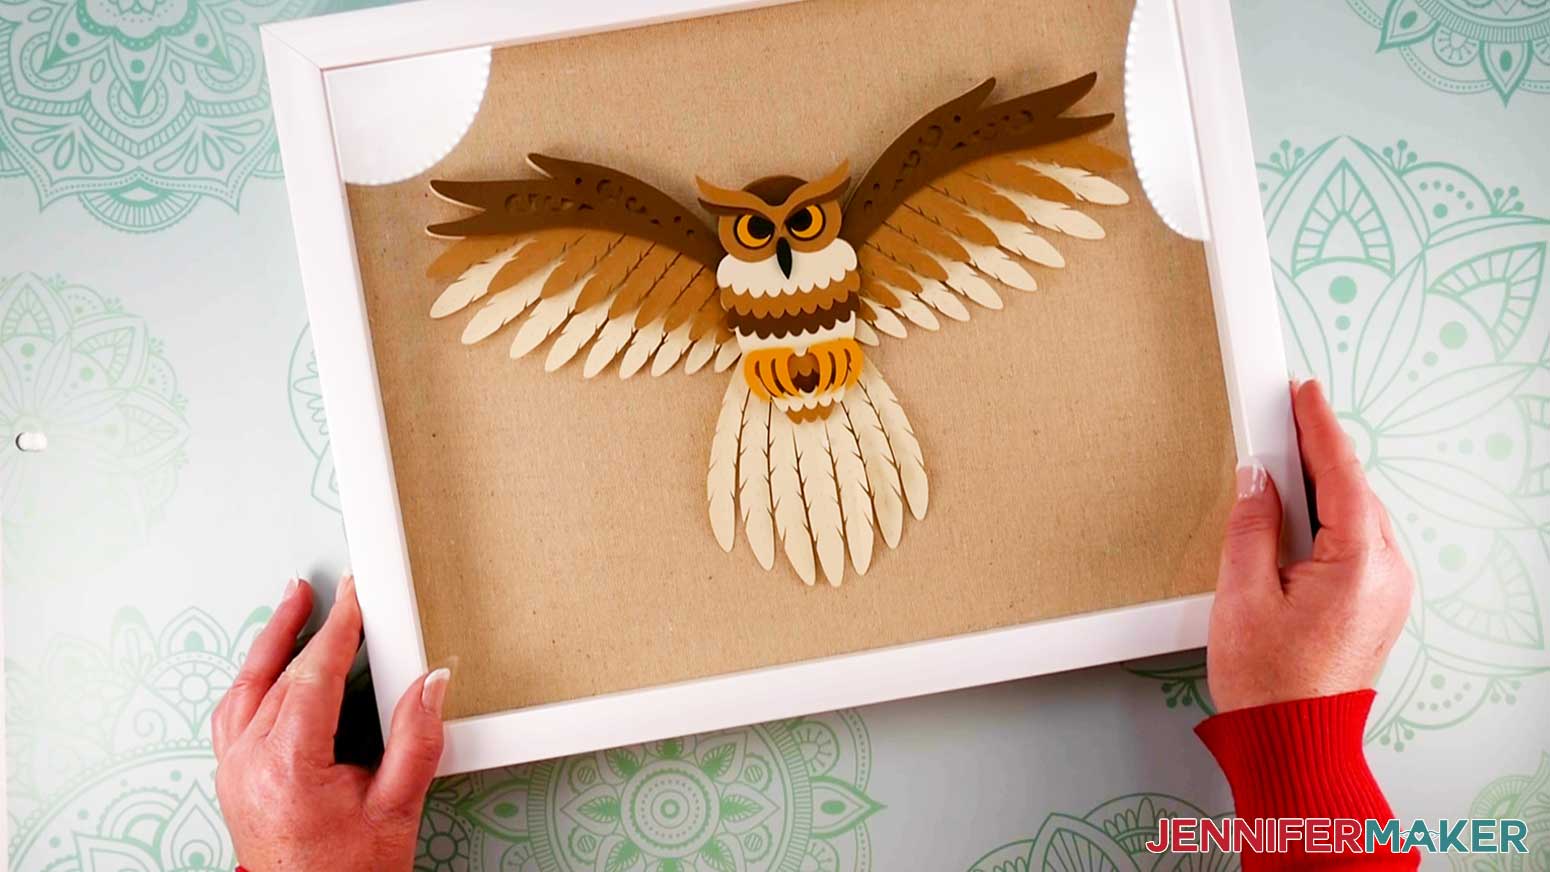 An overhead photo of the finished layered owl displayed in a shadow box with a white frame